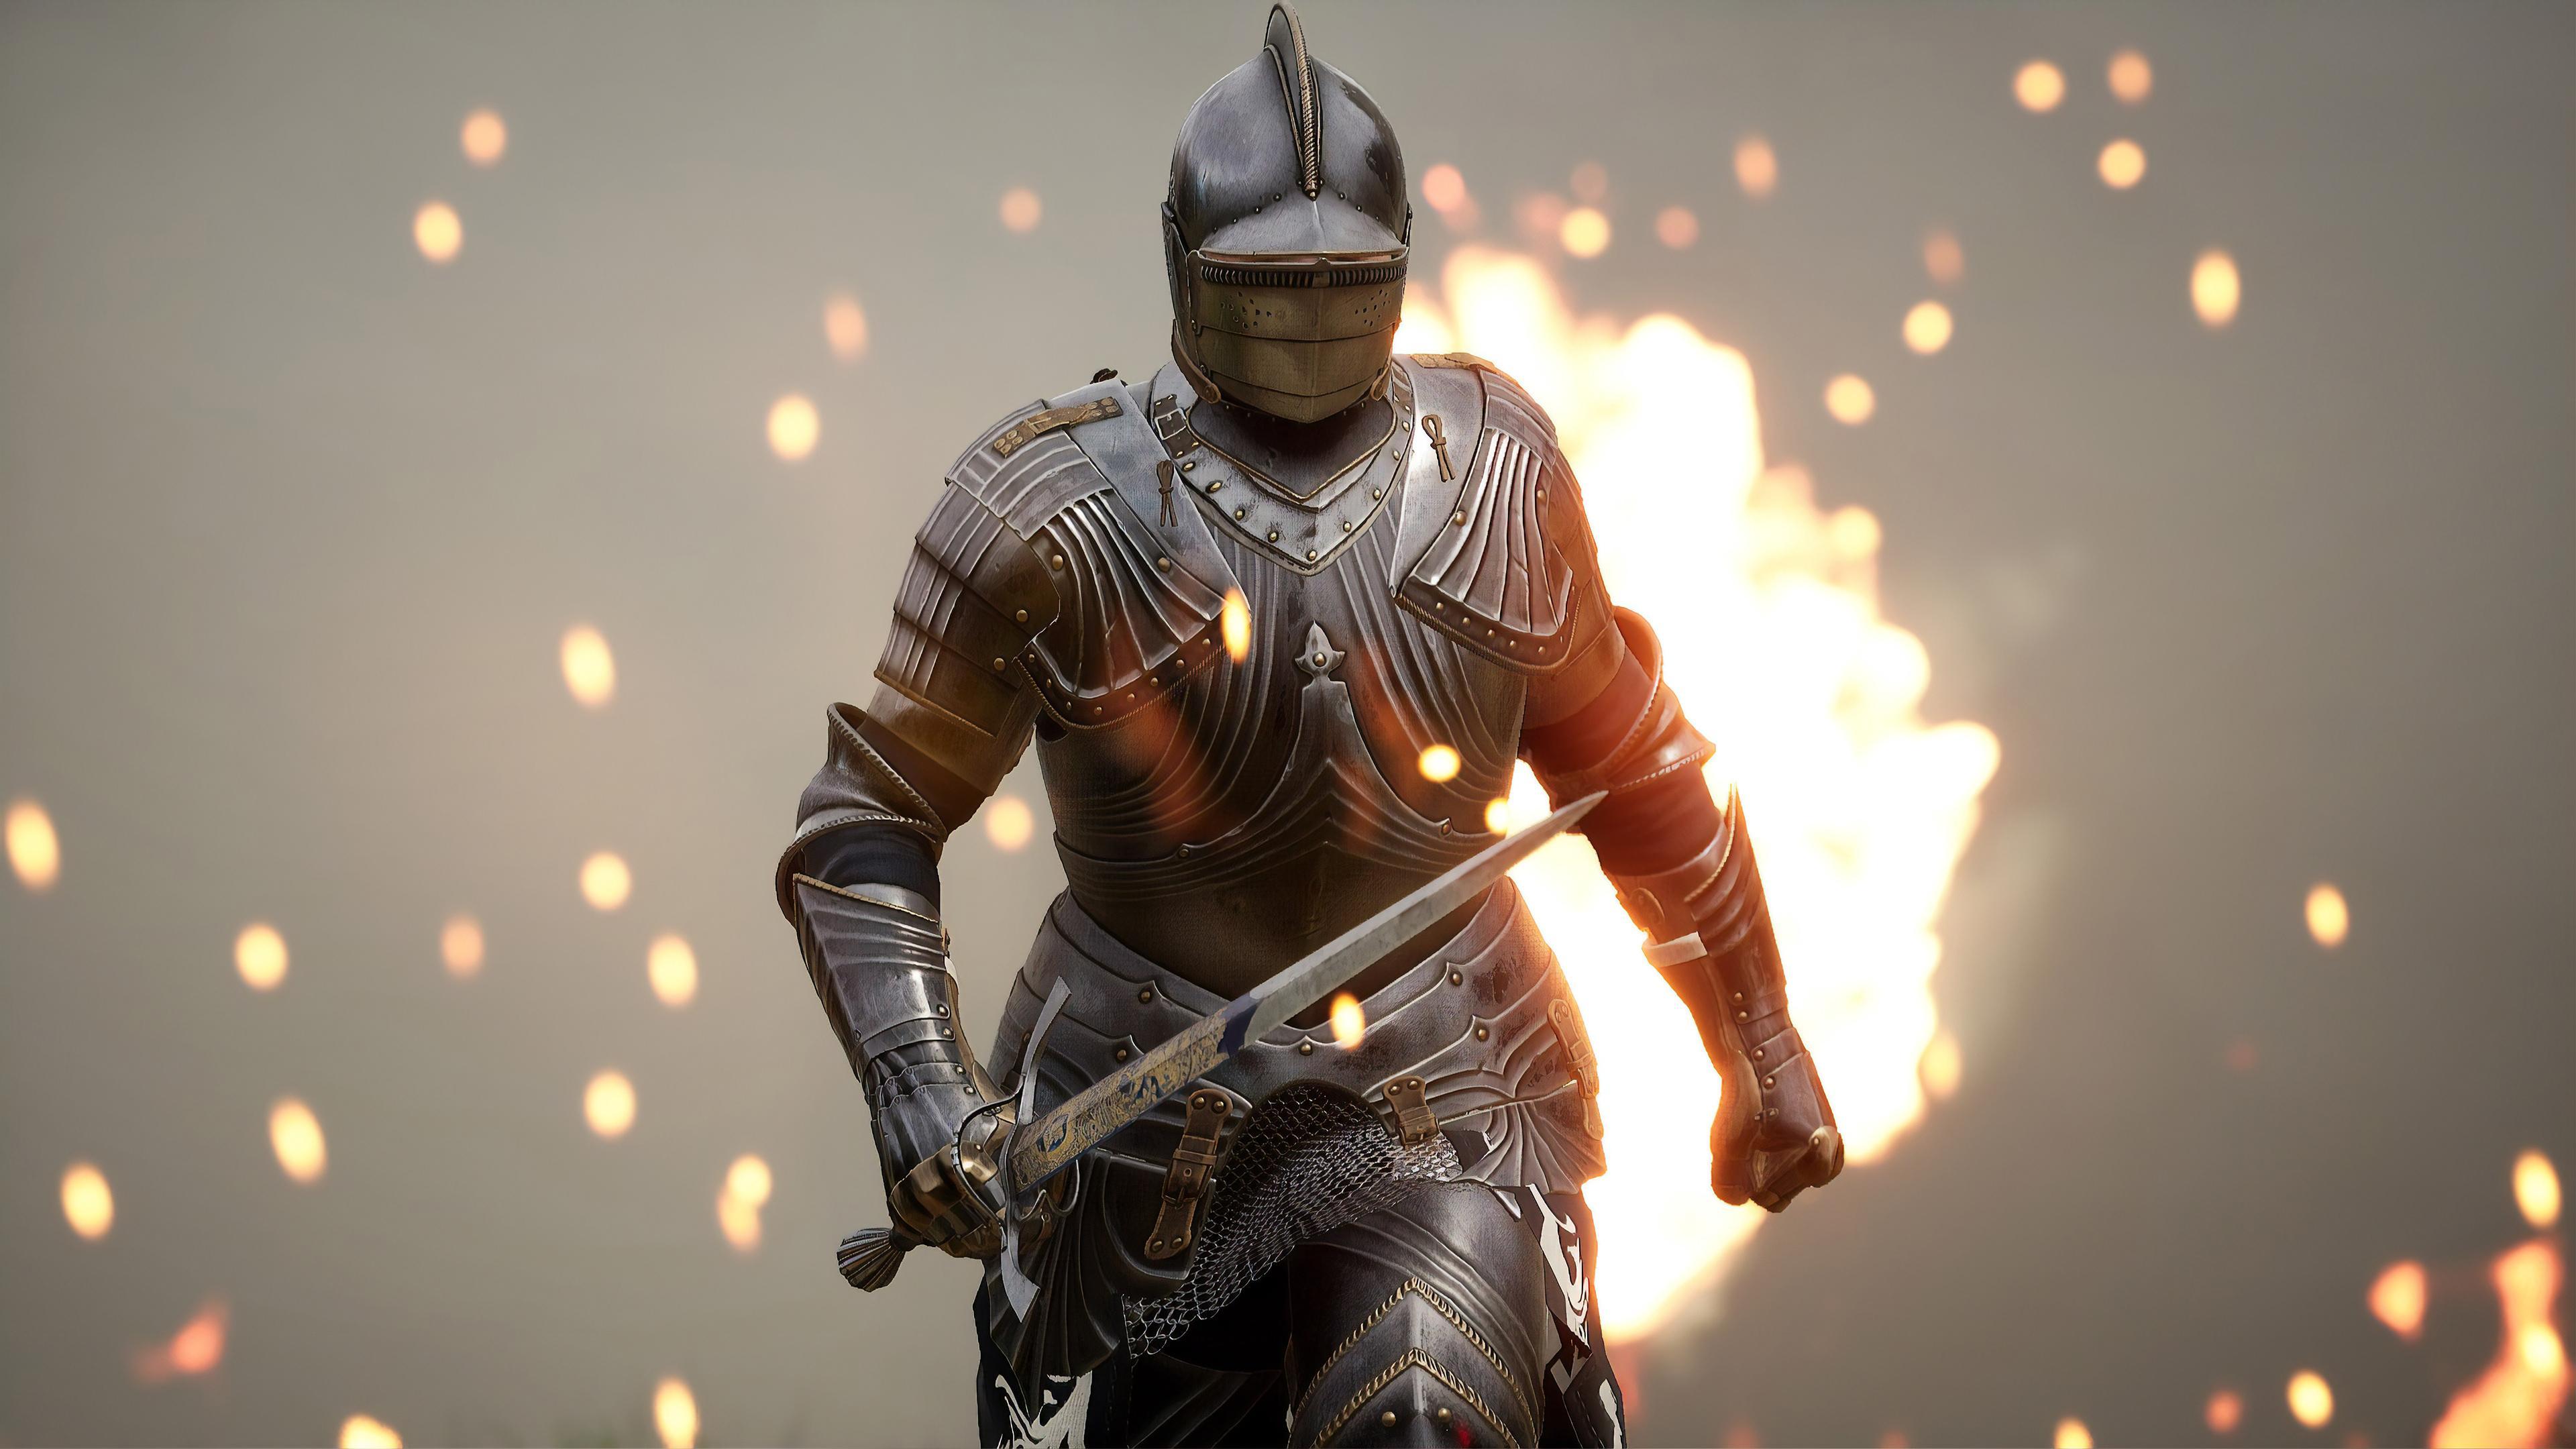 HD Mordhau Wallpapers Discover more Games Mordhau wallpaper  httpswwwkolpapercom96546hdmordhauwallpapers  Wallpaper Early  modern period Battlefield